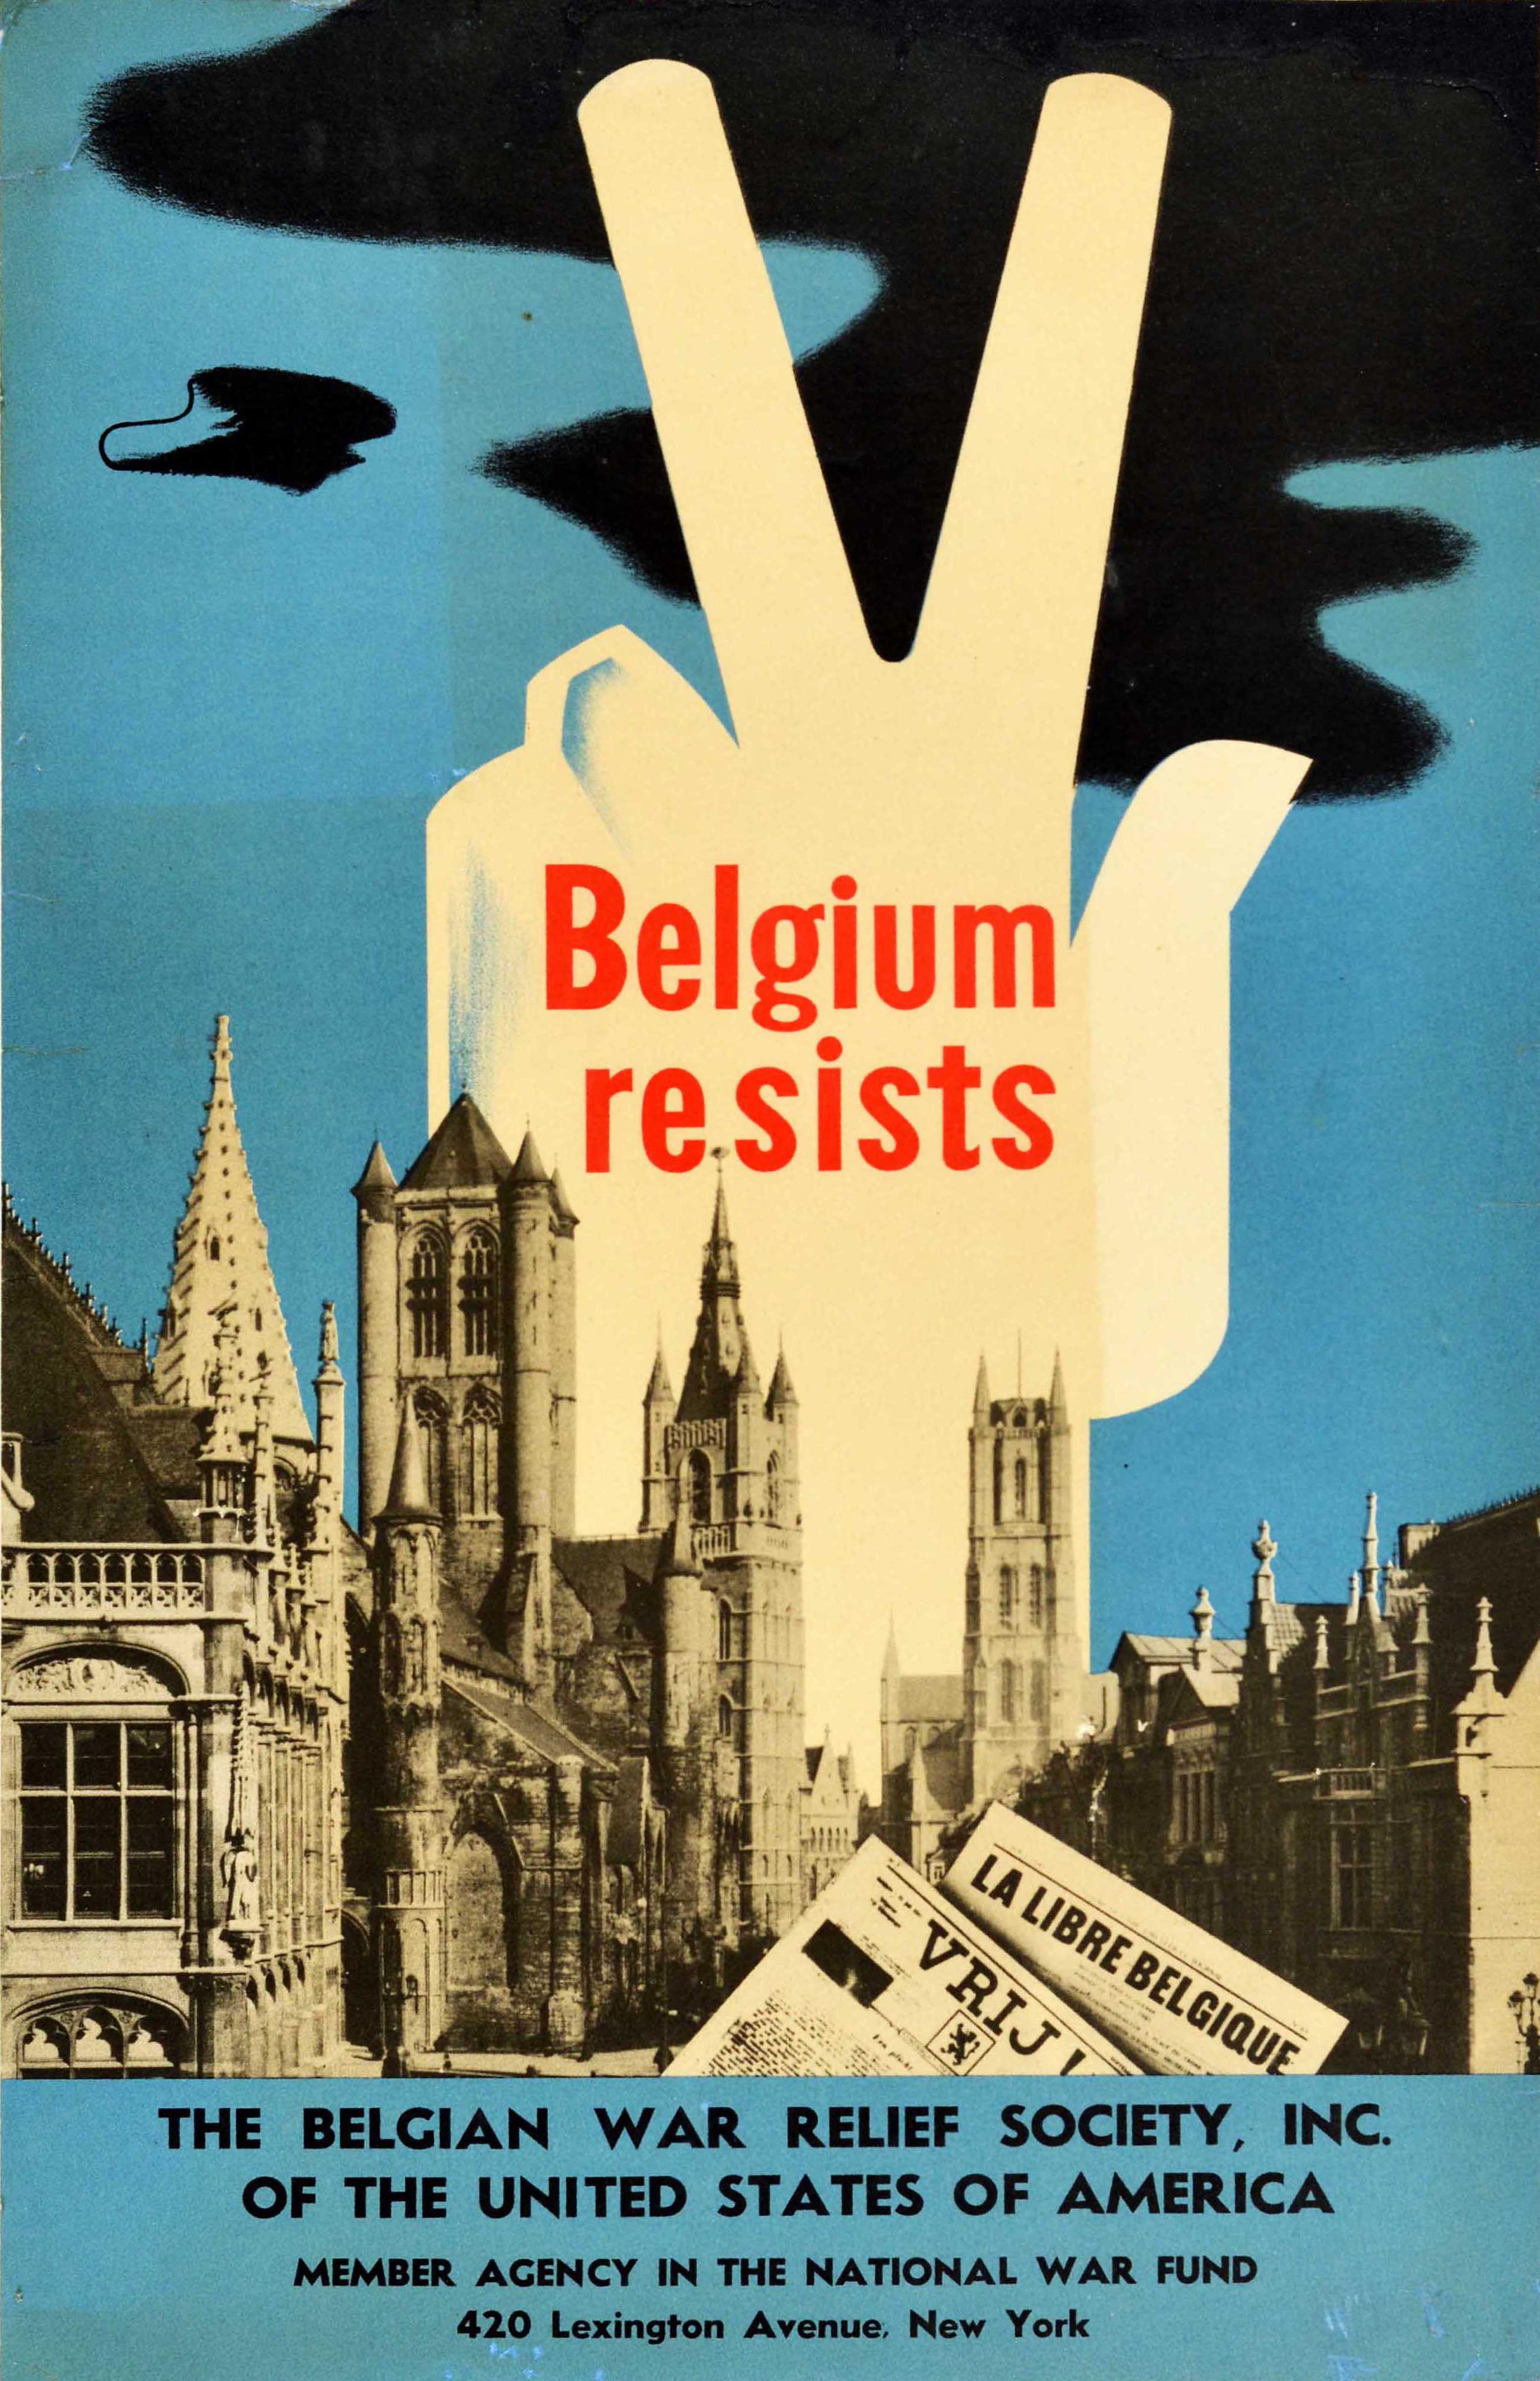 Unknown Print - Original Vintage WWII Poster Belgium Resists V Victory Sign War Relief Fund USA